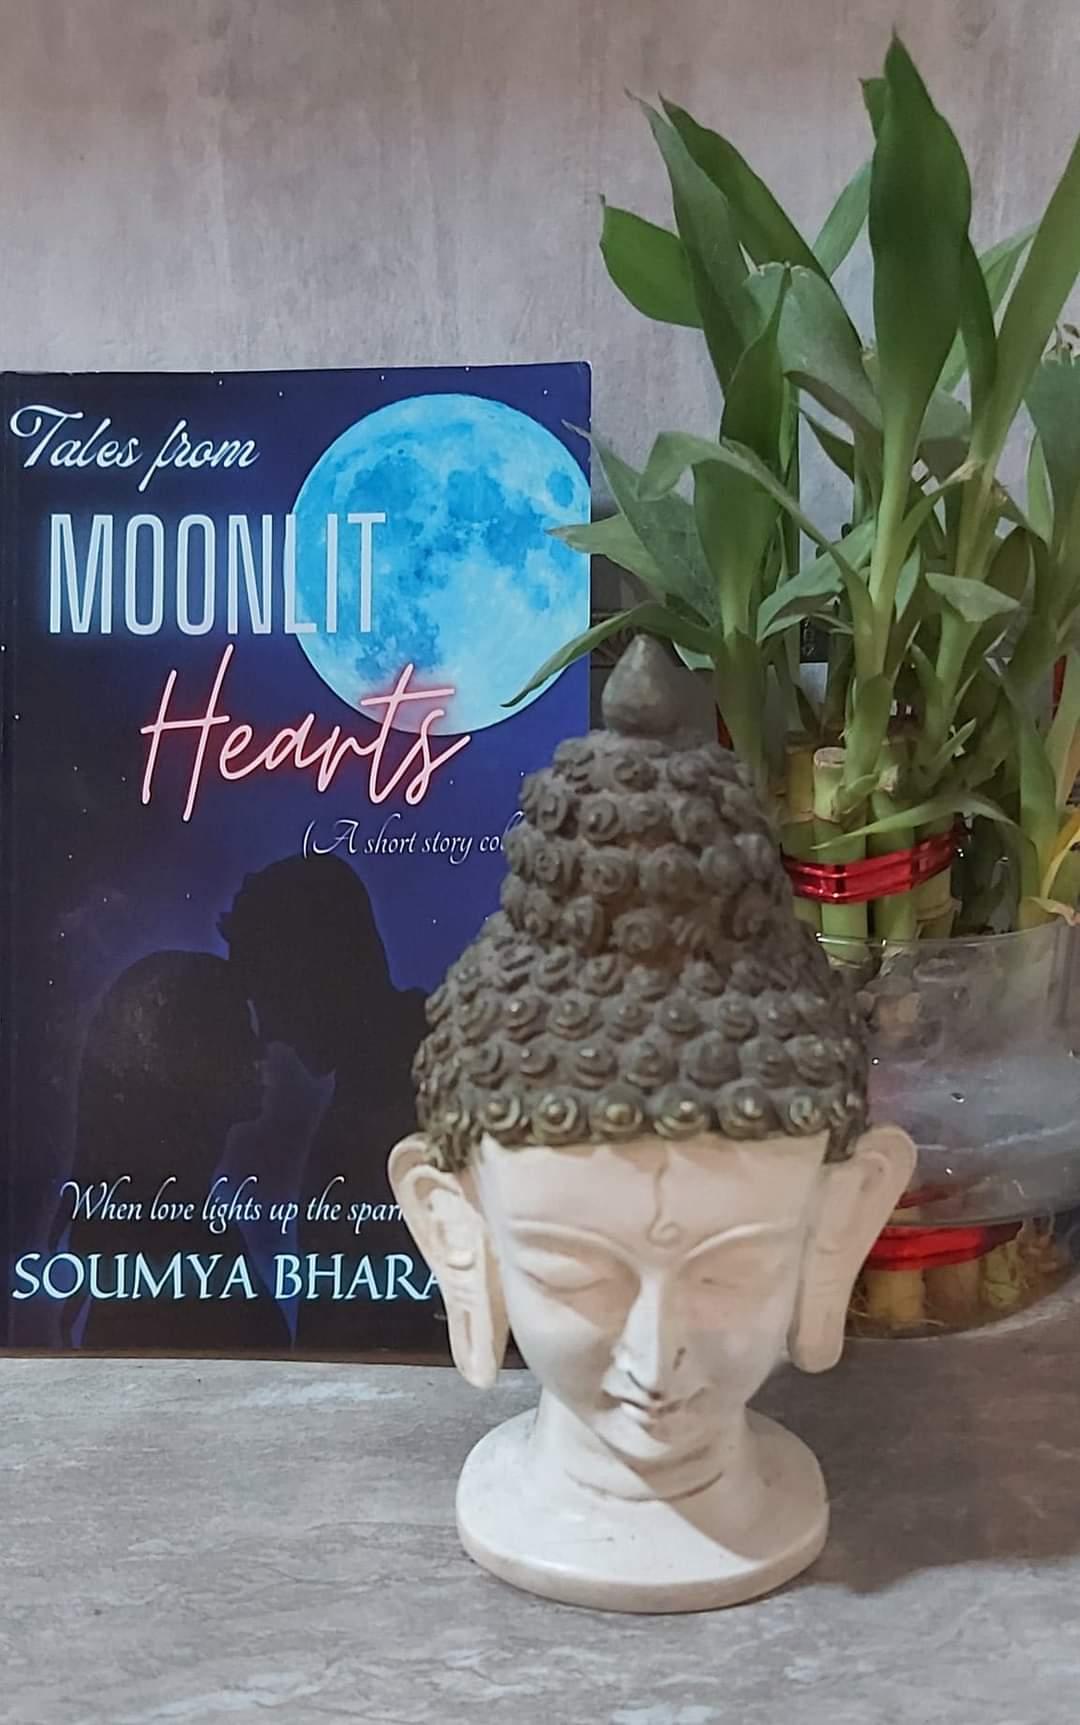 Tales From Moonlit Hearts- by Soumya Bharathi